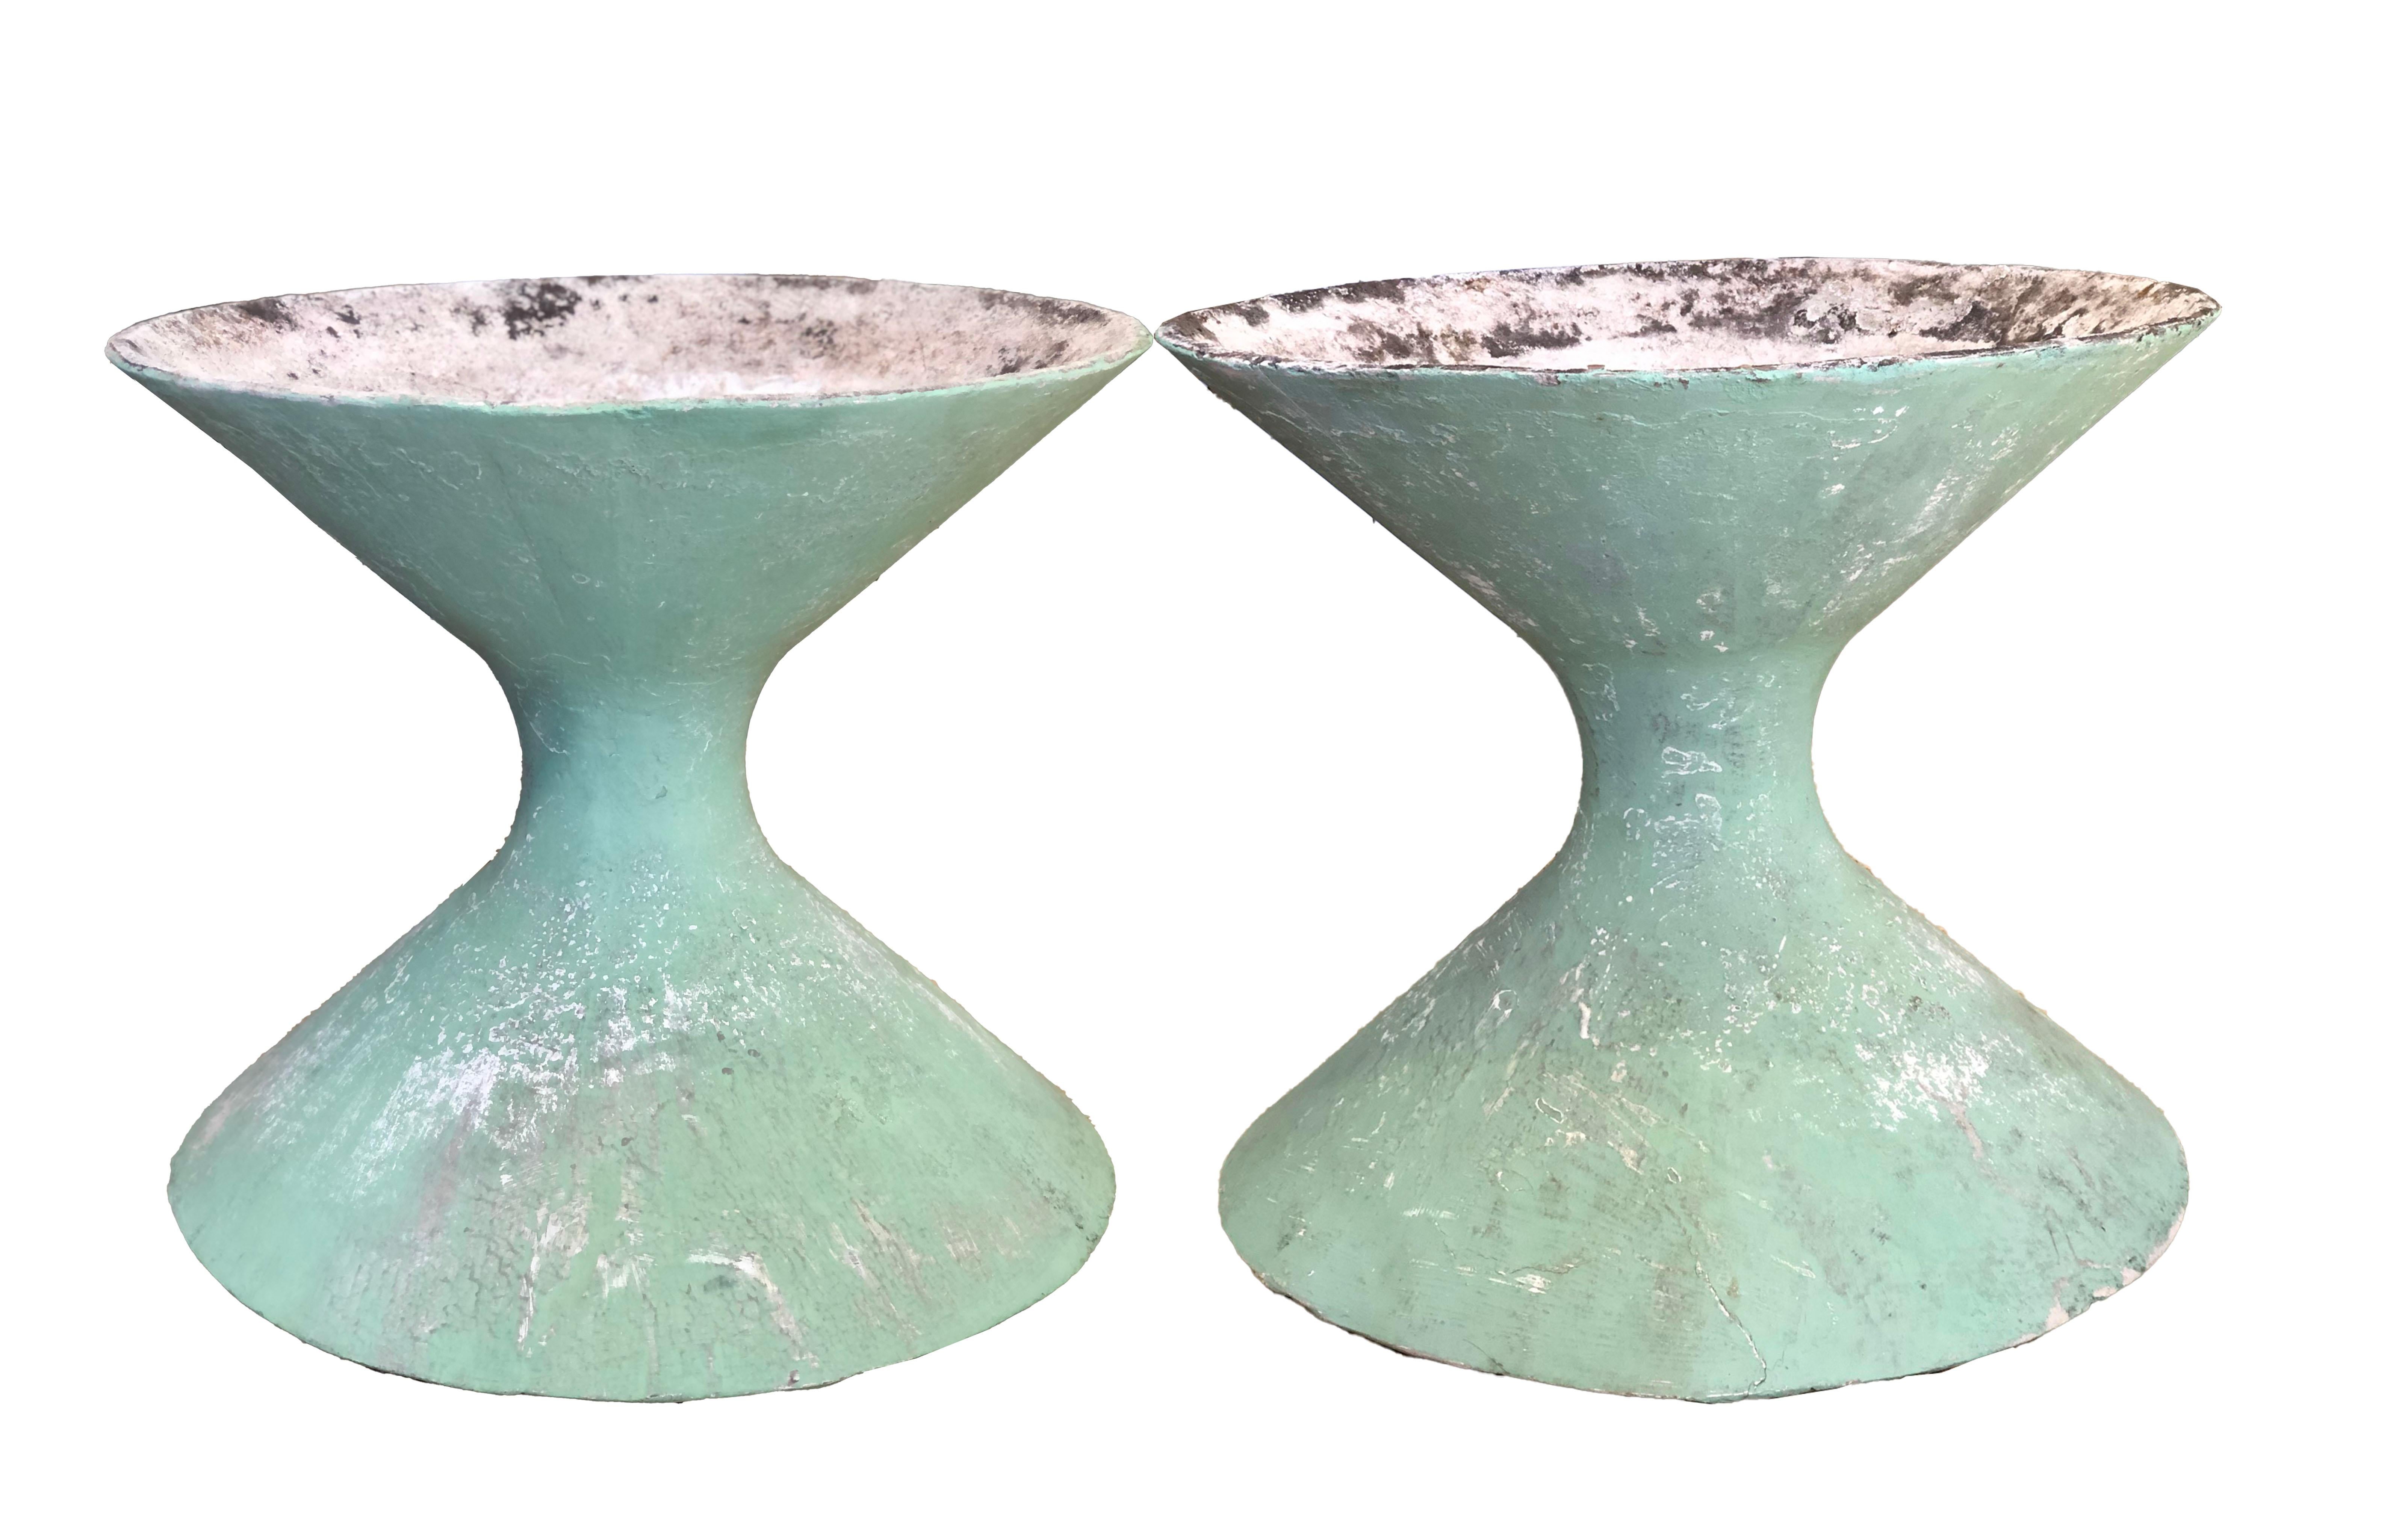 Willy Guhl sculptural hourglass planters in green with beautiful age and patina. Two matching planters available. Priced individually. Very hard to find a pair with color!